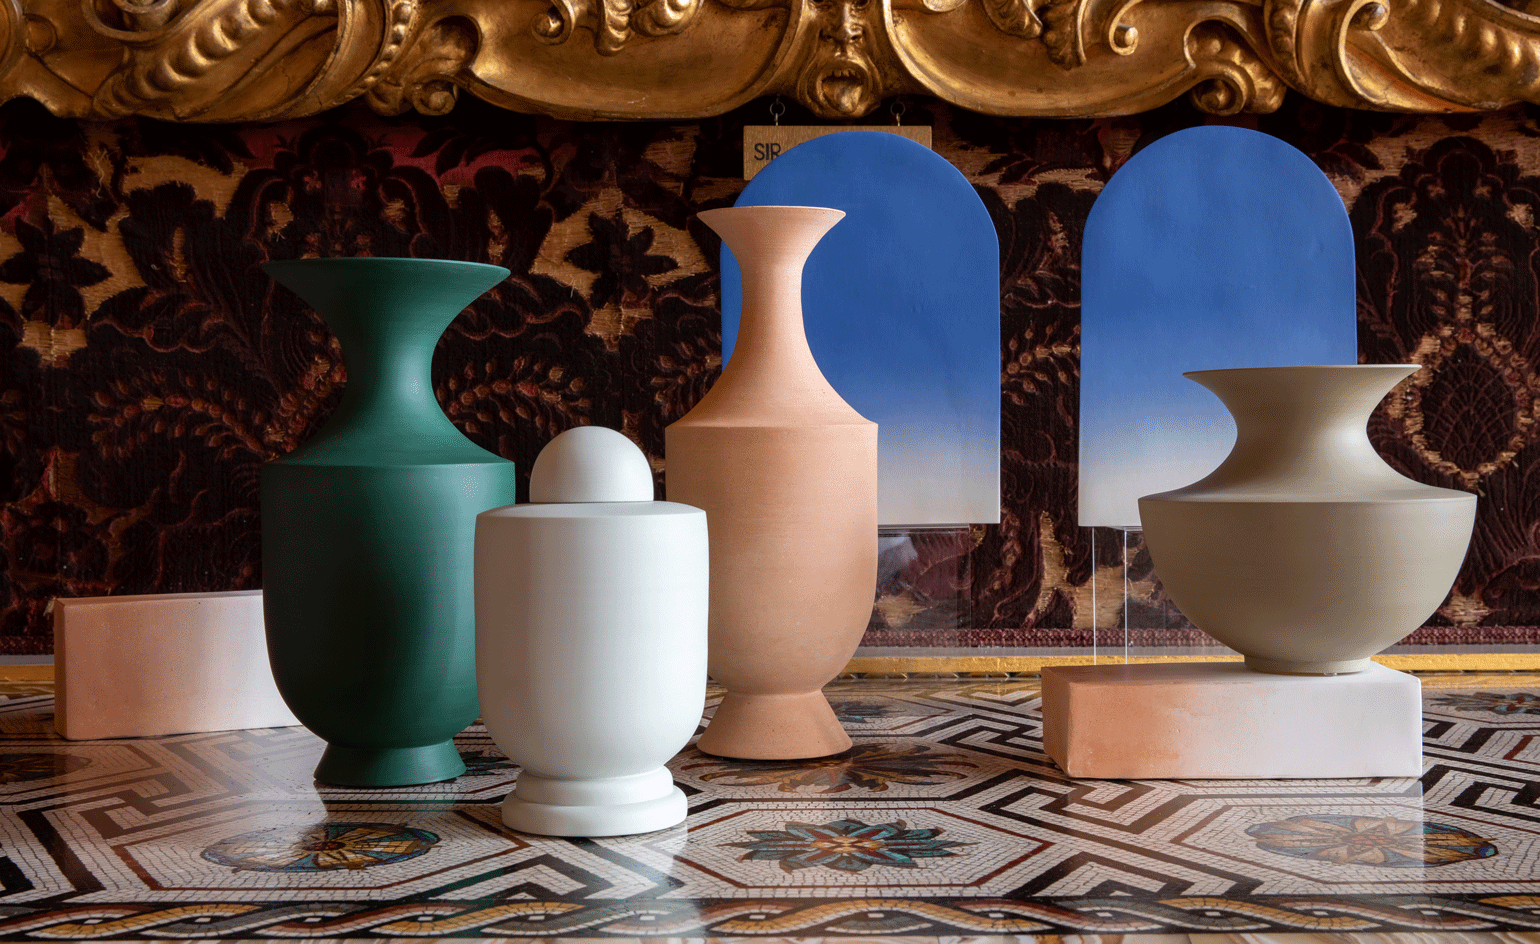 coloured cermaic vases against an ornate background